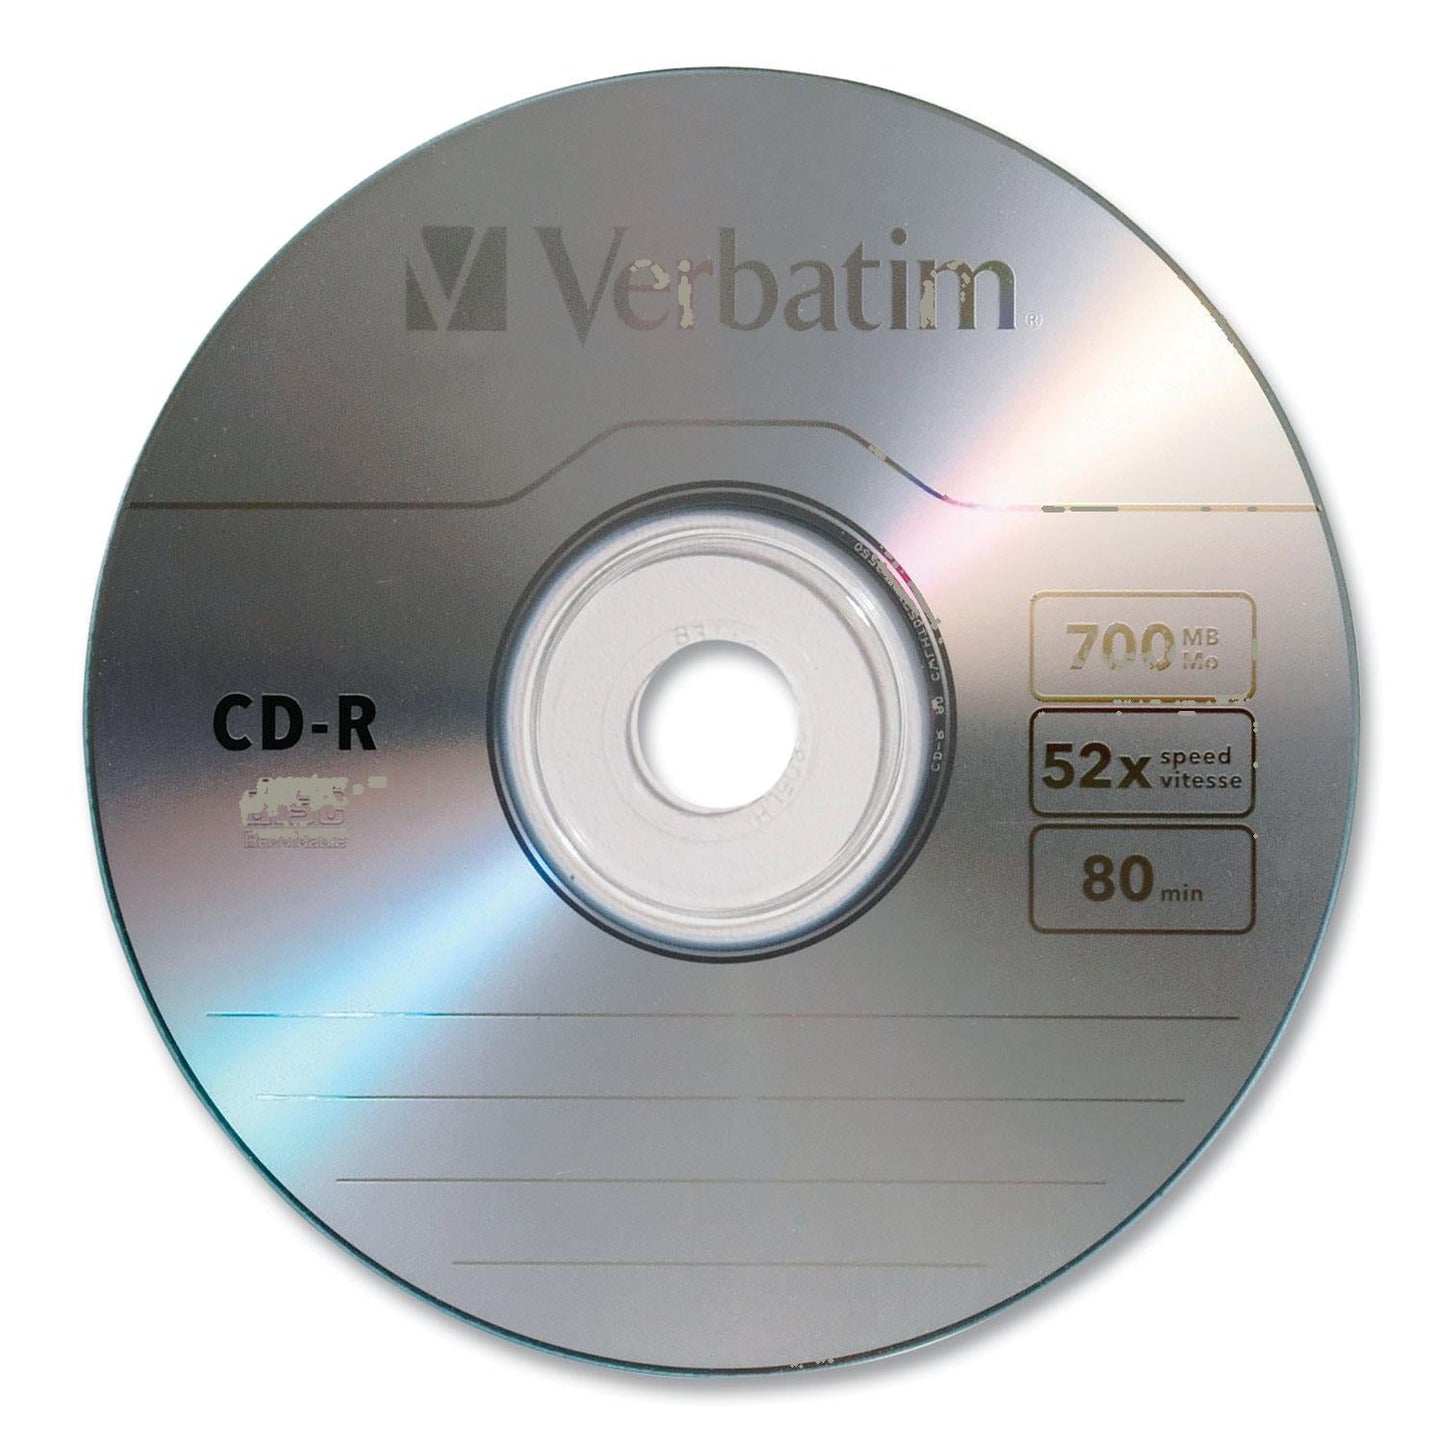 CD-R Recordable Disc, 700 MB/80 Min, 52x, 10/Pack